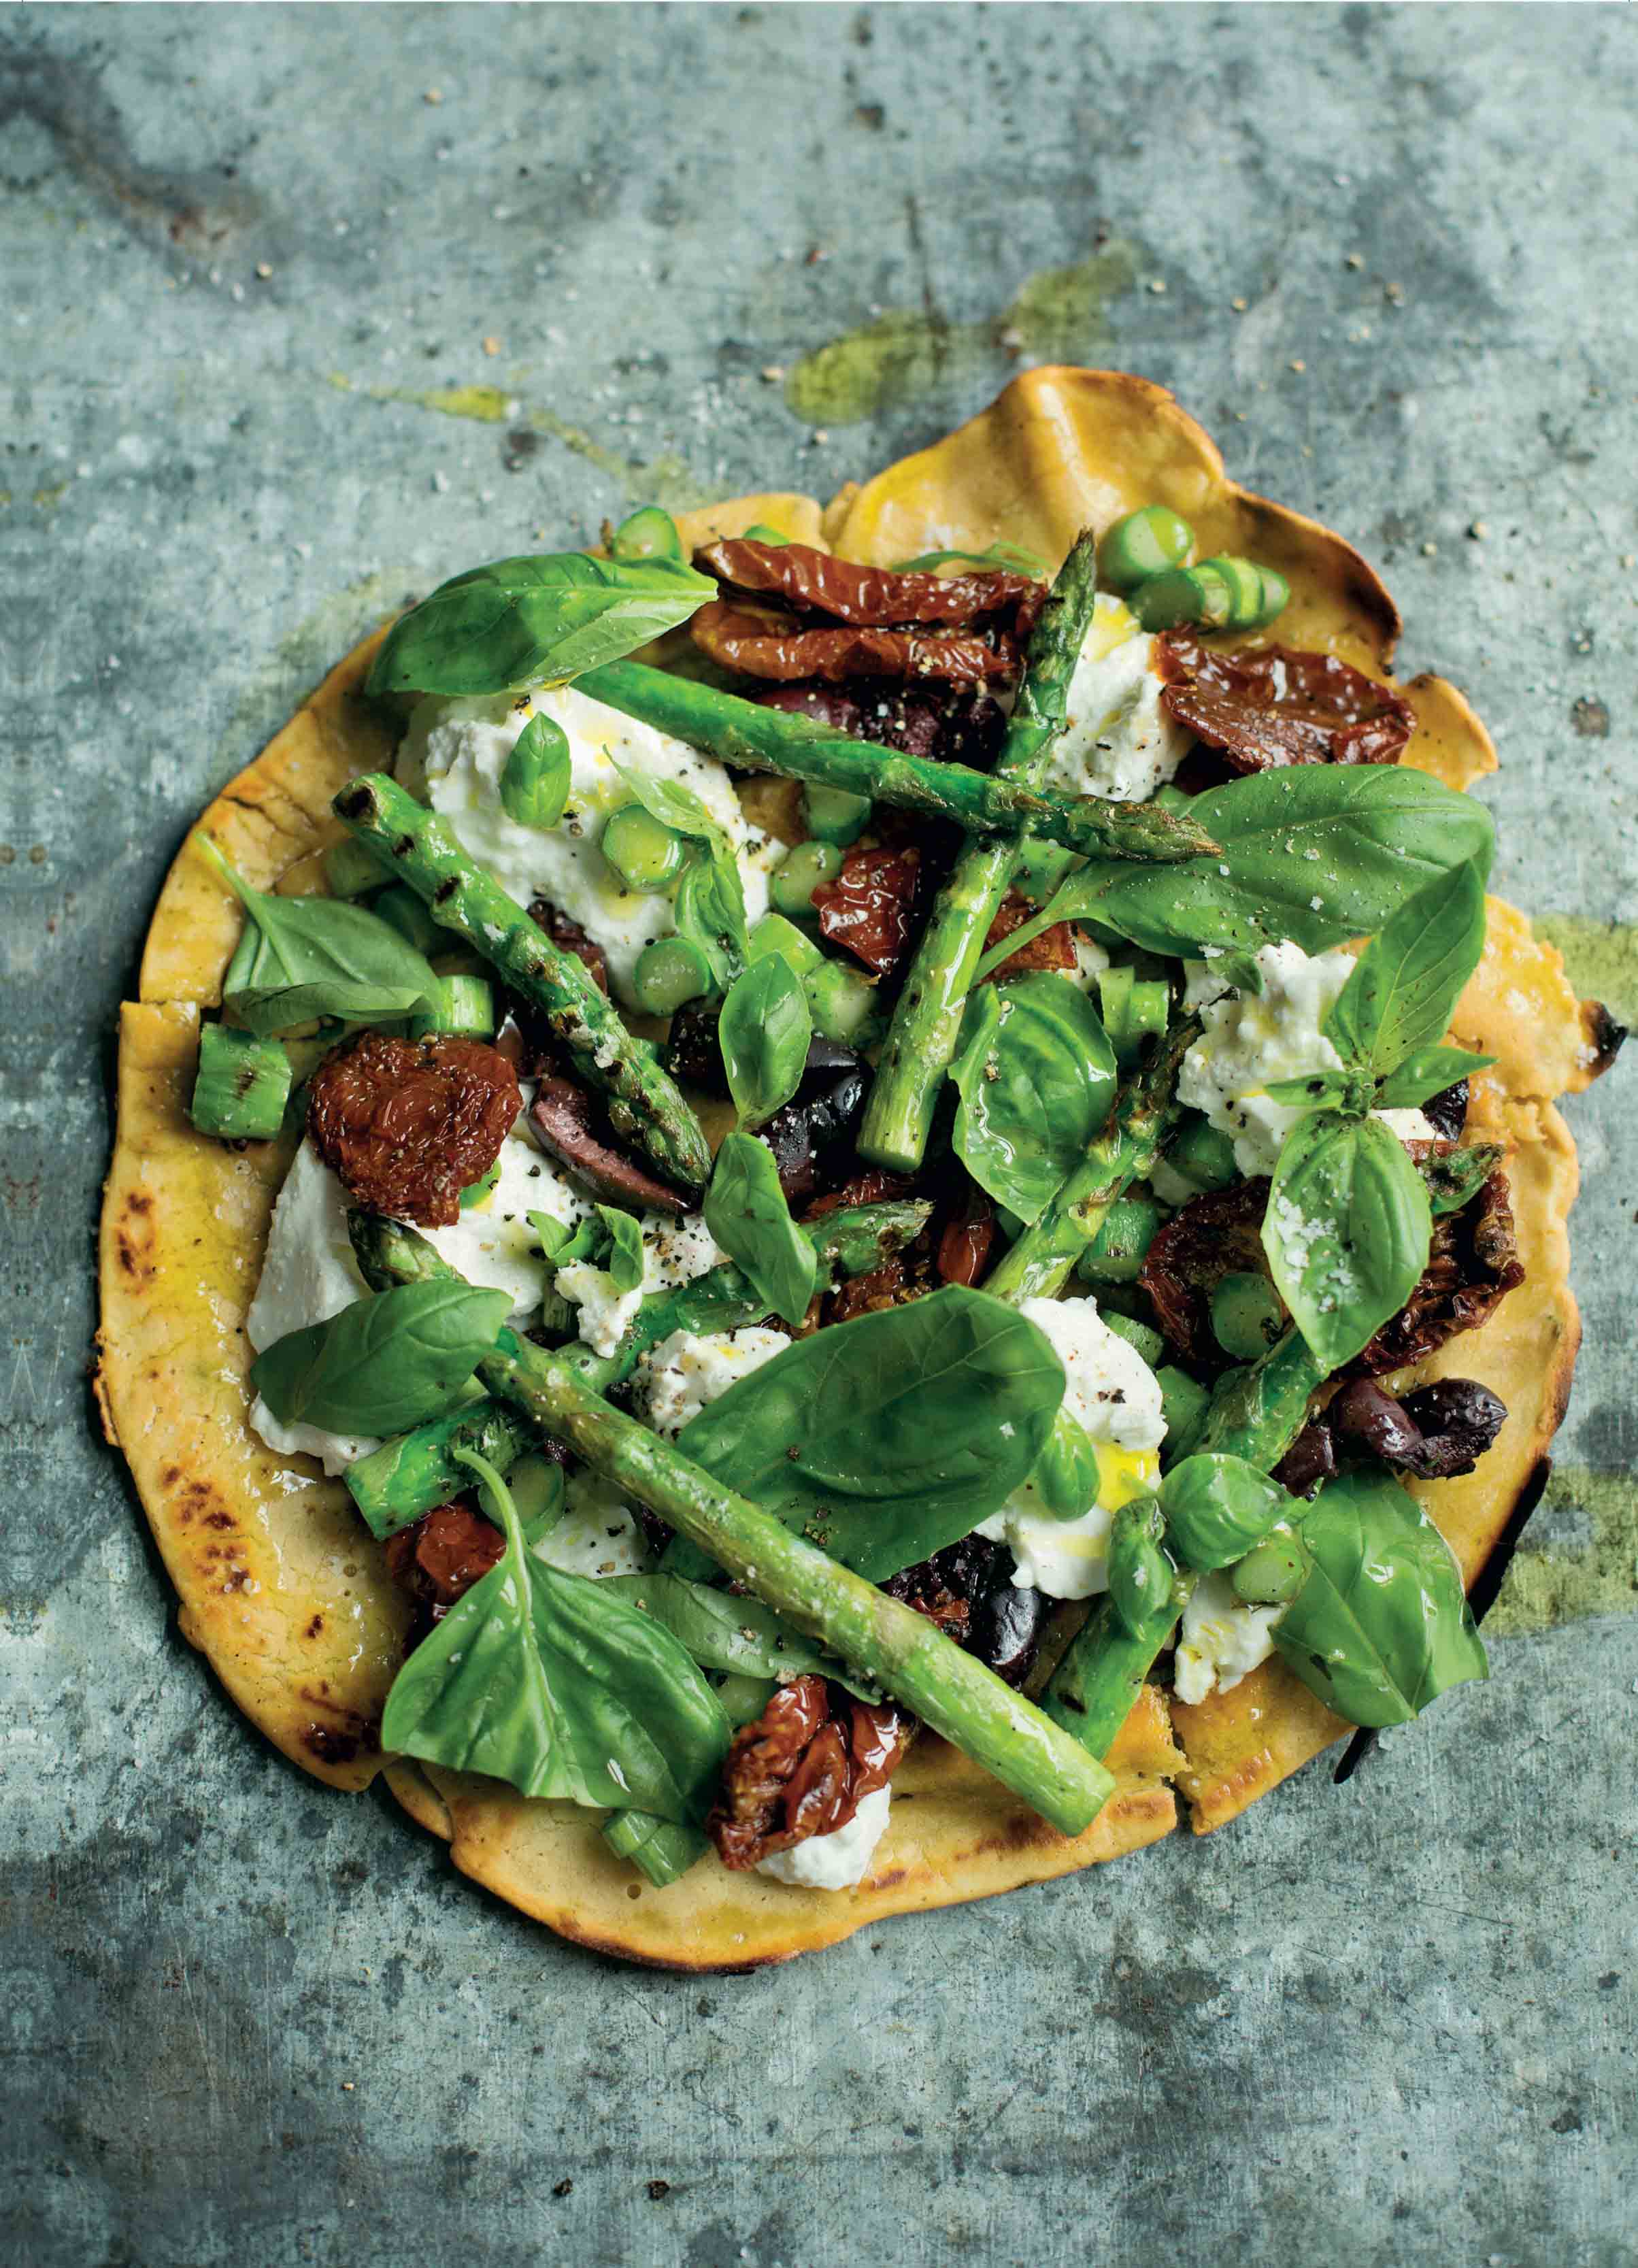 Socca pizza with char-grilled asparagus, olives and ricotta